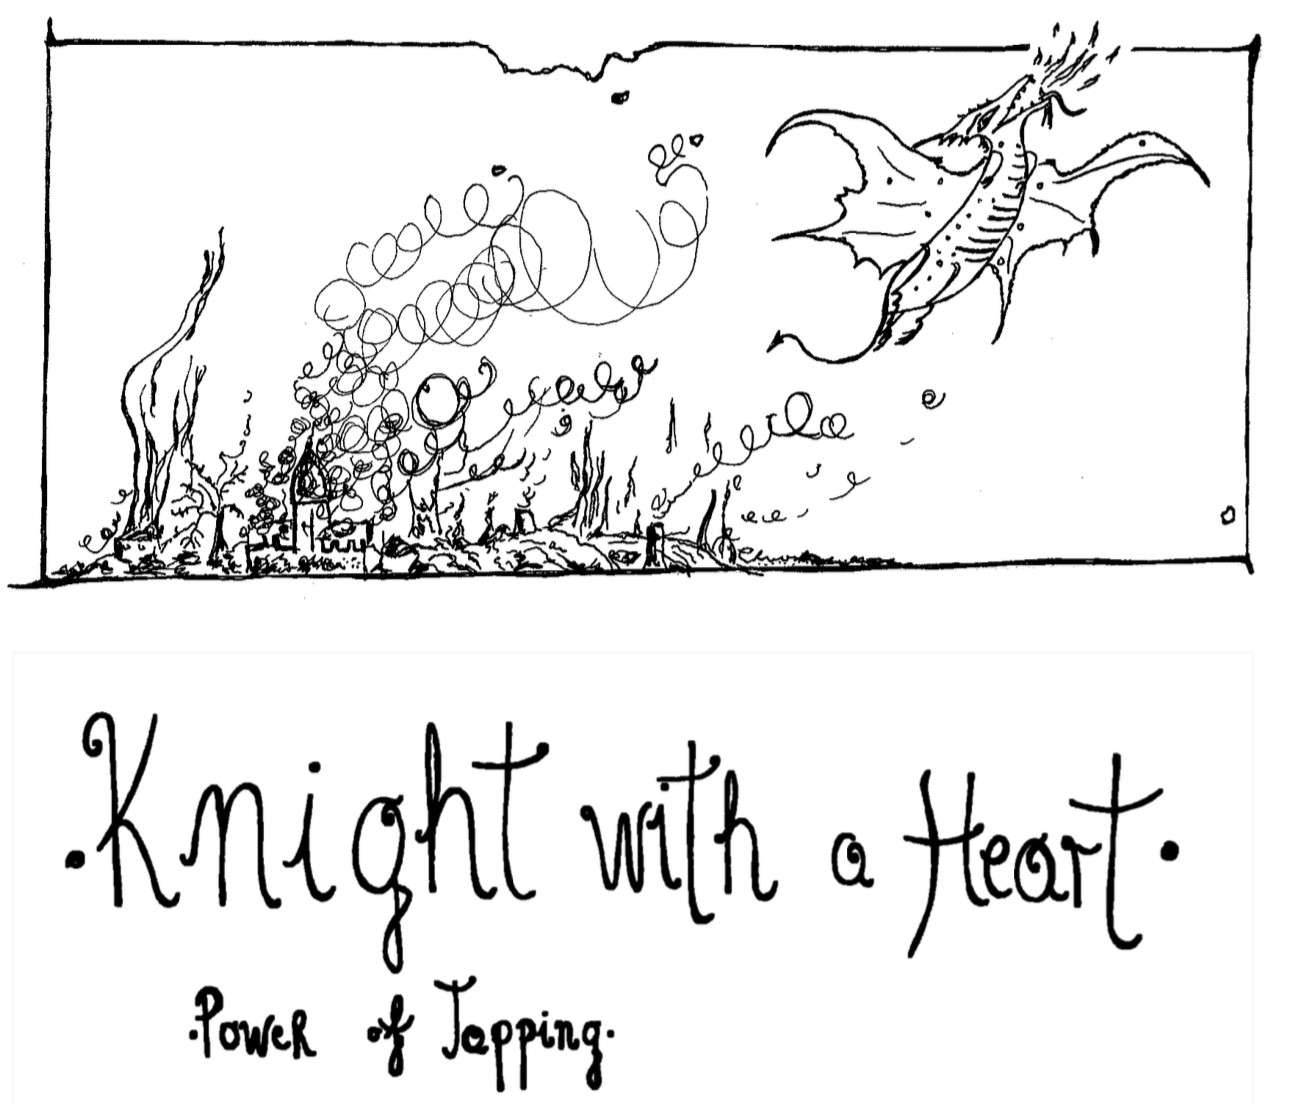 Knight with a Heart childrens story-EFT for children